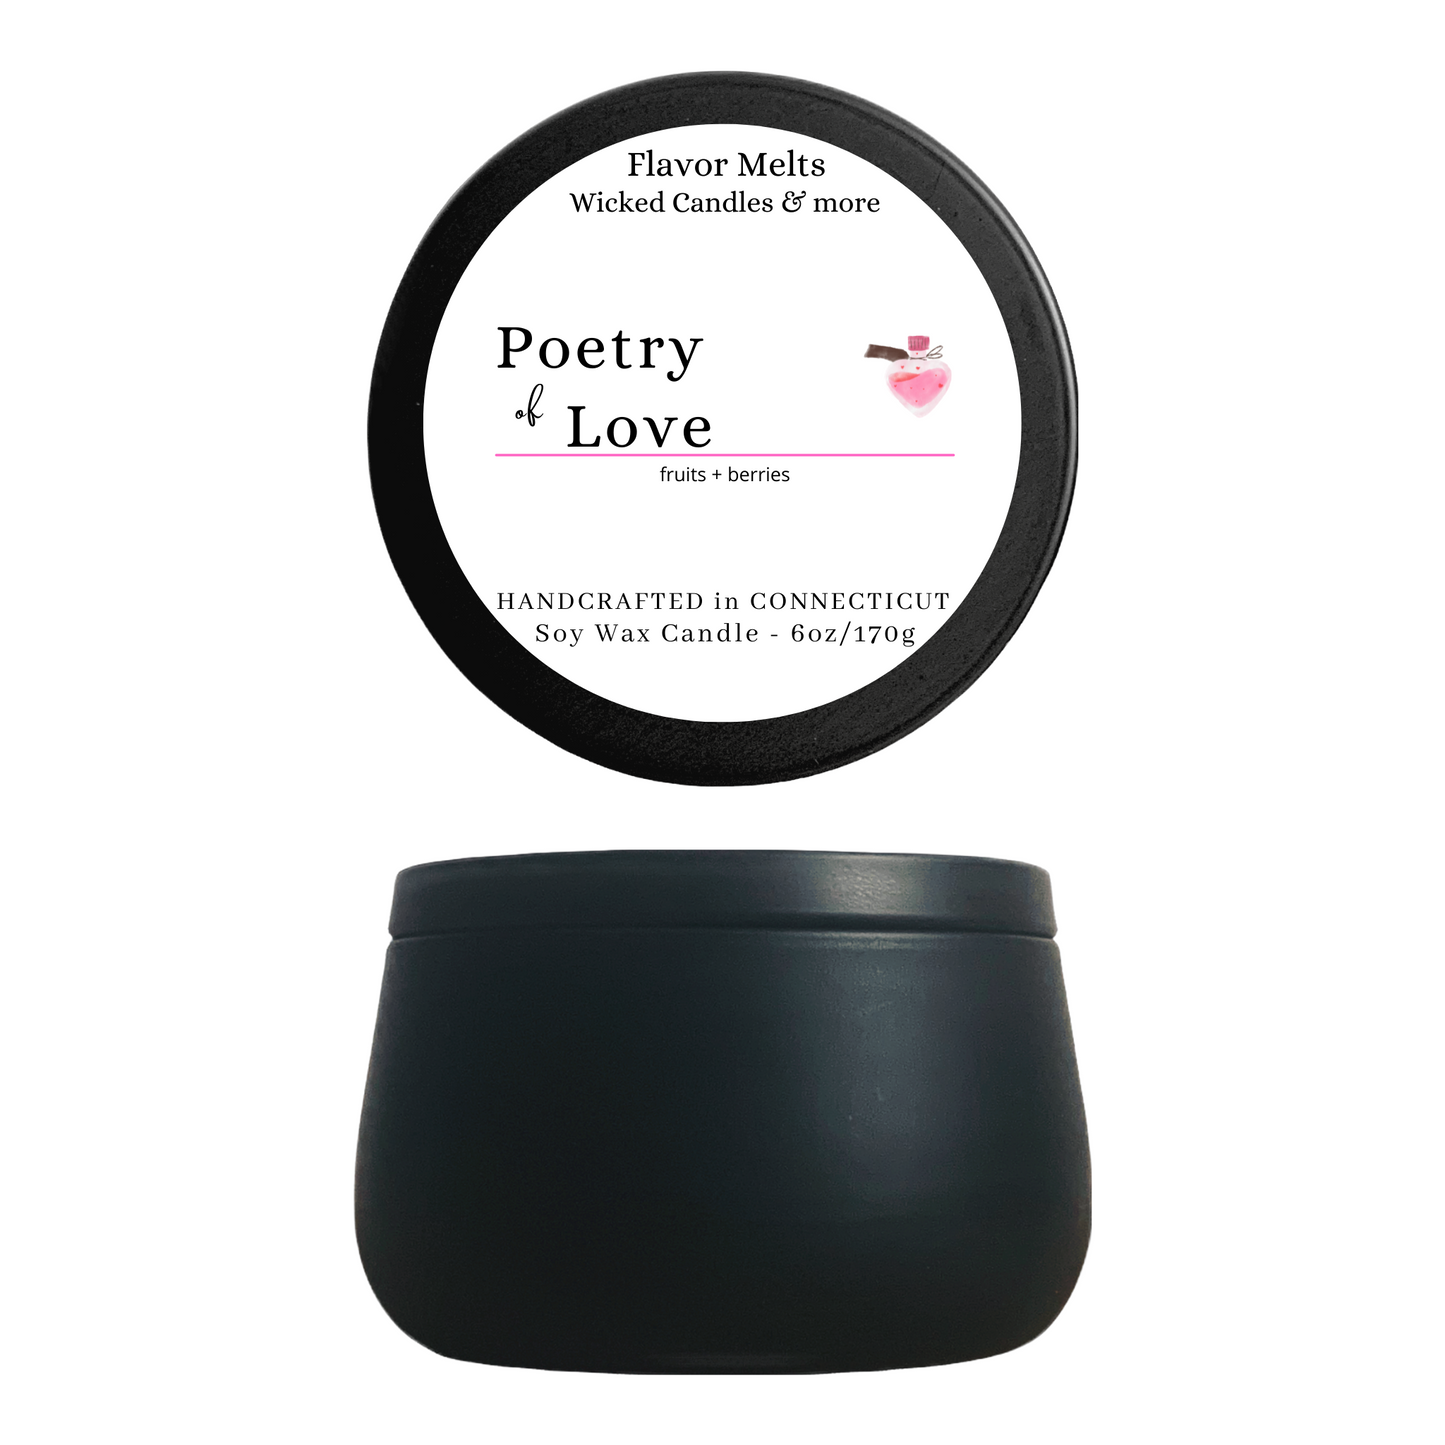 poetry of love woodwick candle